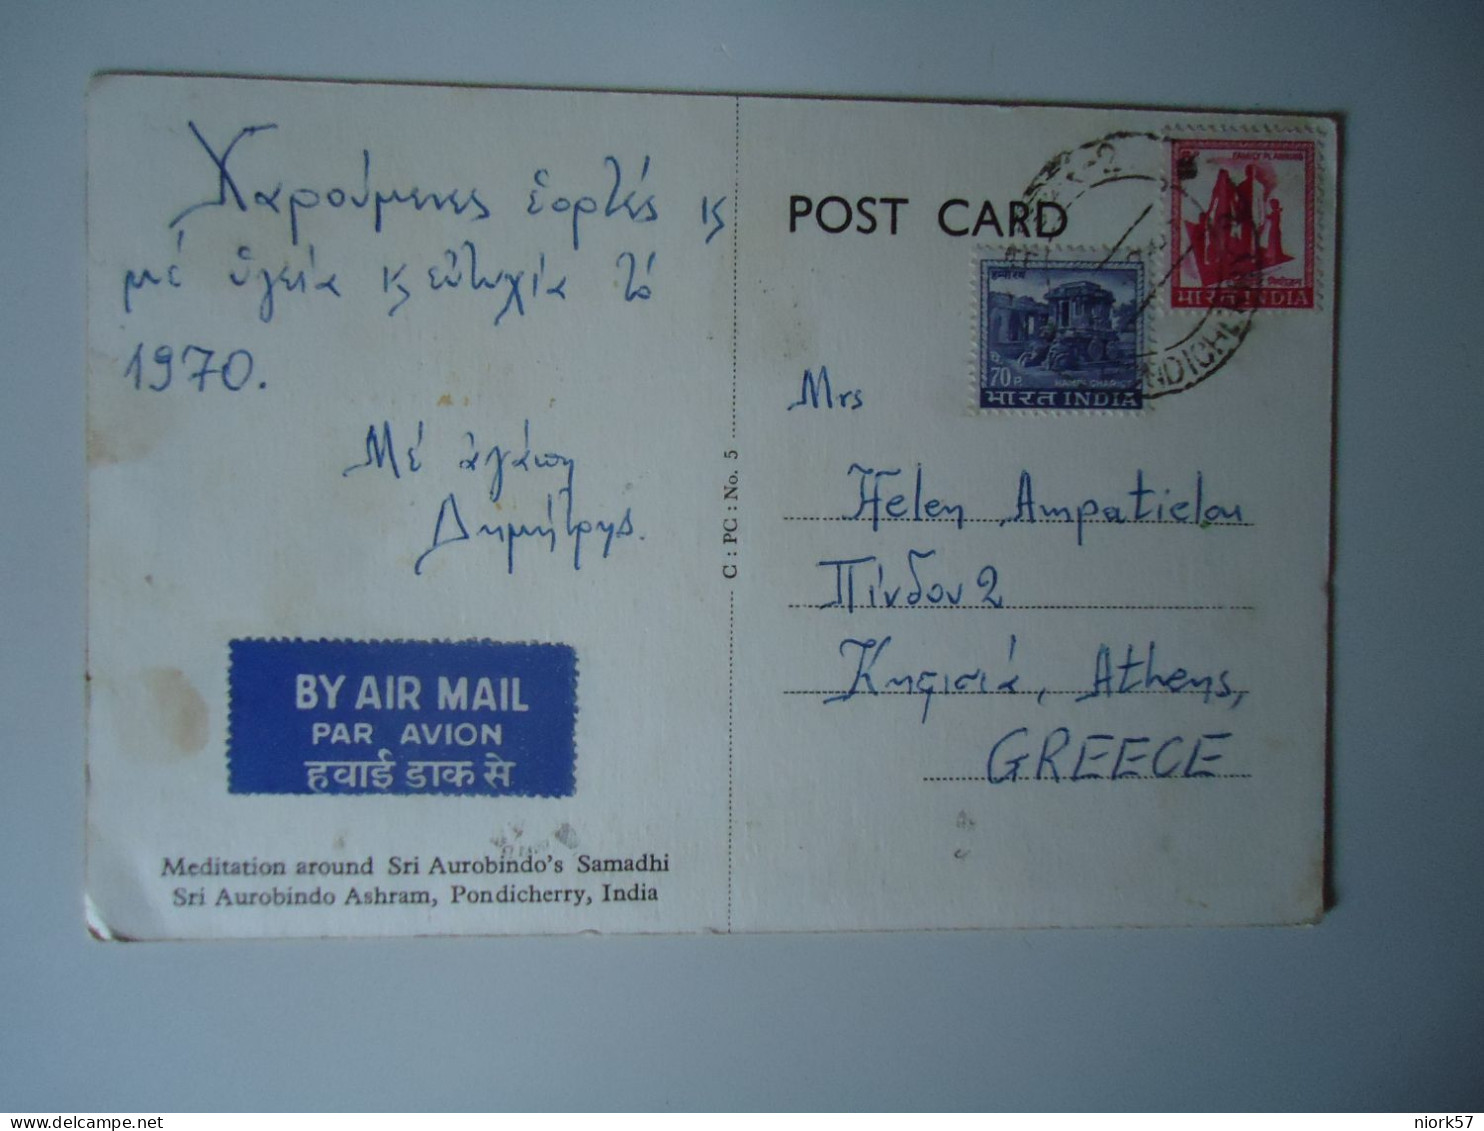 INDIA    POSTCARDS  1970 PONDICHERRY  STAMPS   MORE  PURHASES 10%  DISSCOUNT - India